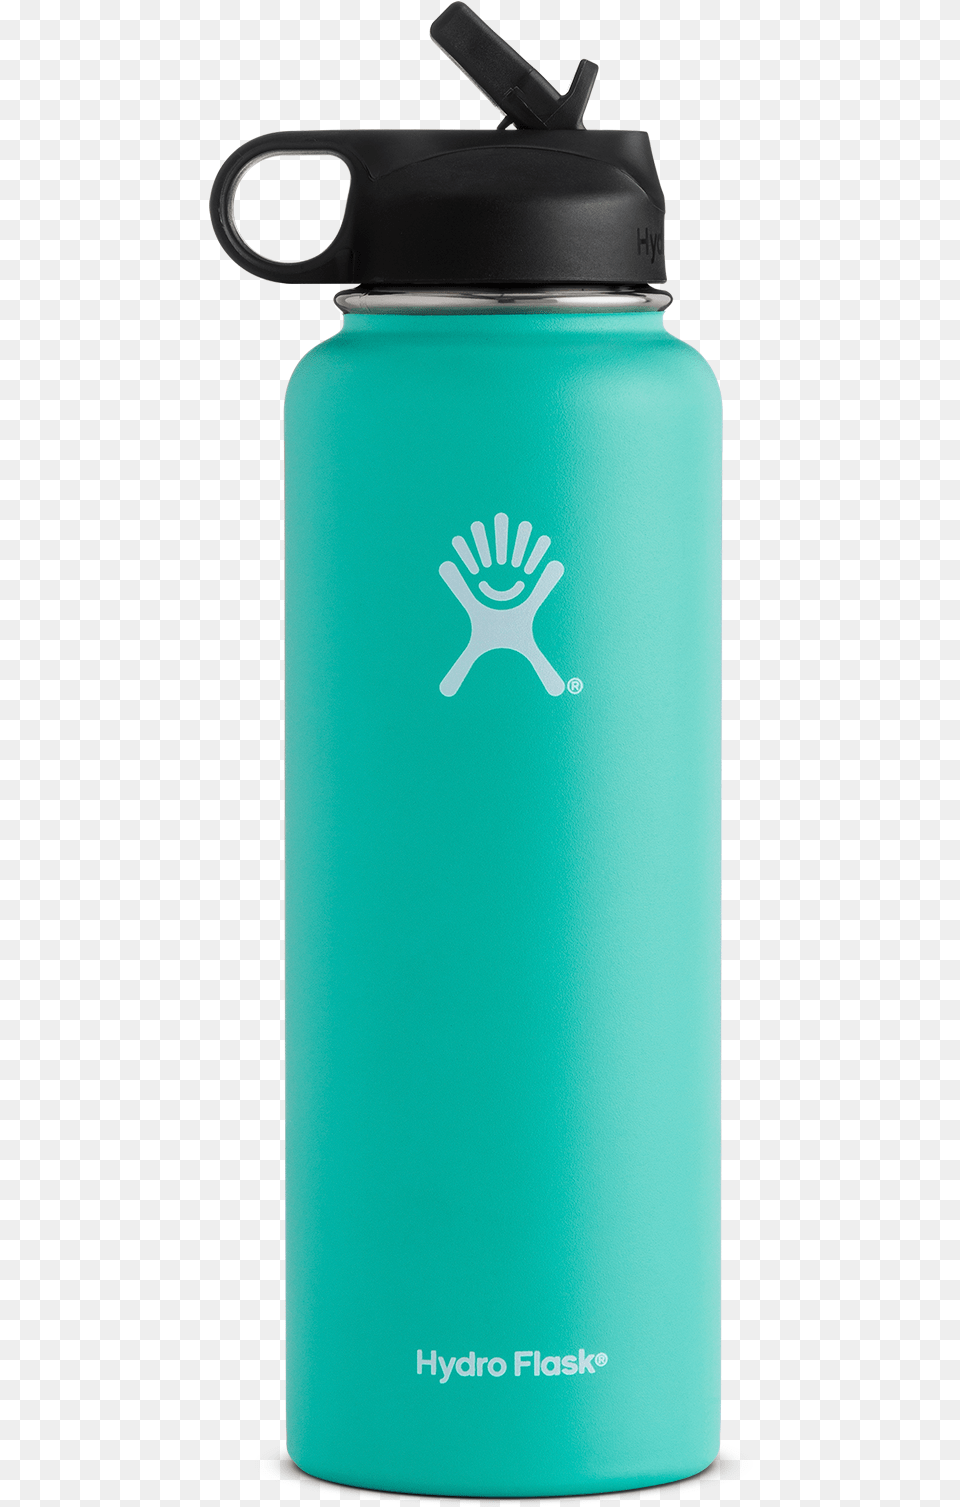 Red Hydro Flask With Straw, Bottle, Water Bottle, Shaker Free Png Download